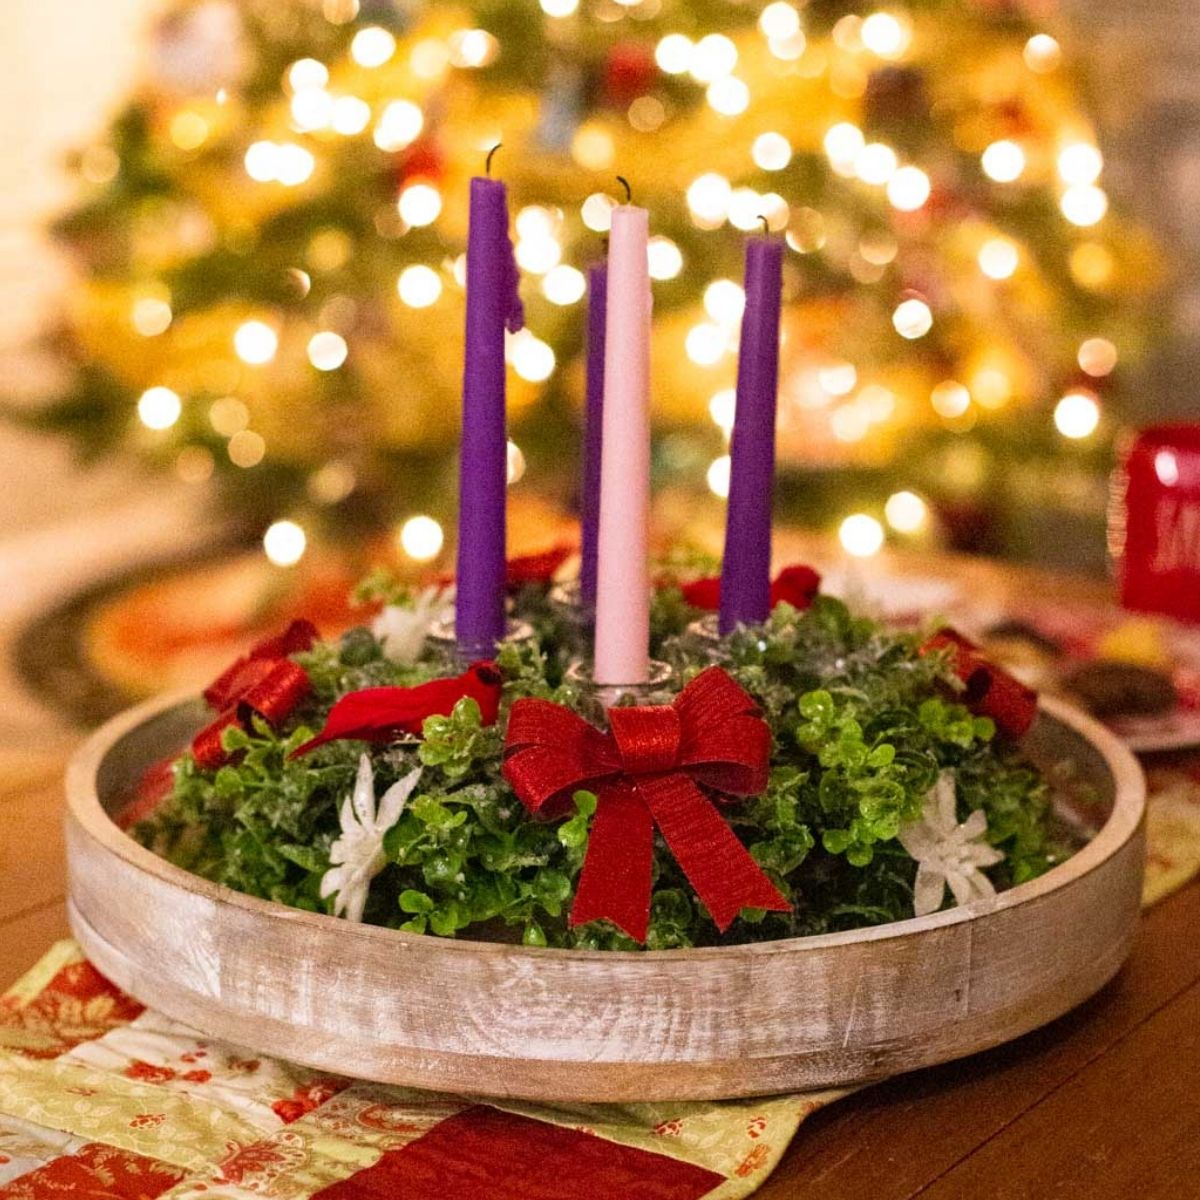 A DIY Advent wreath sits on a table on Christmas Eve in front of a lit Christmas tree.